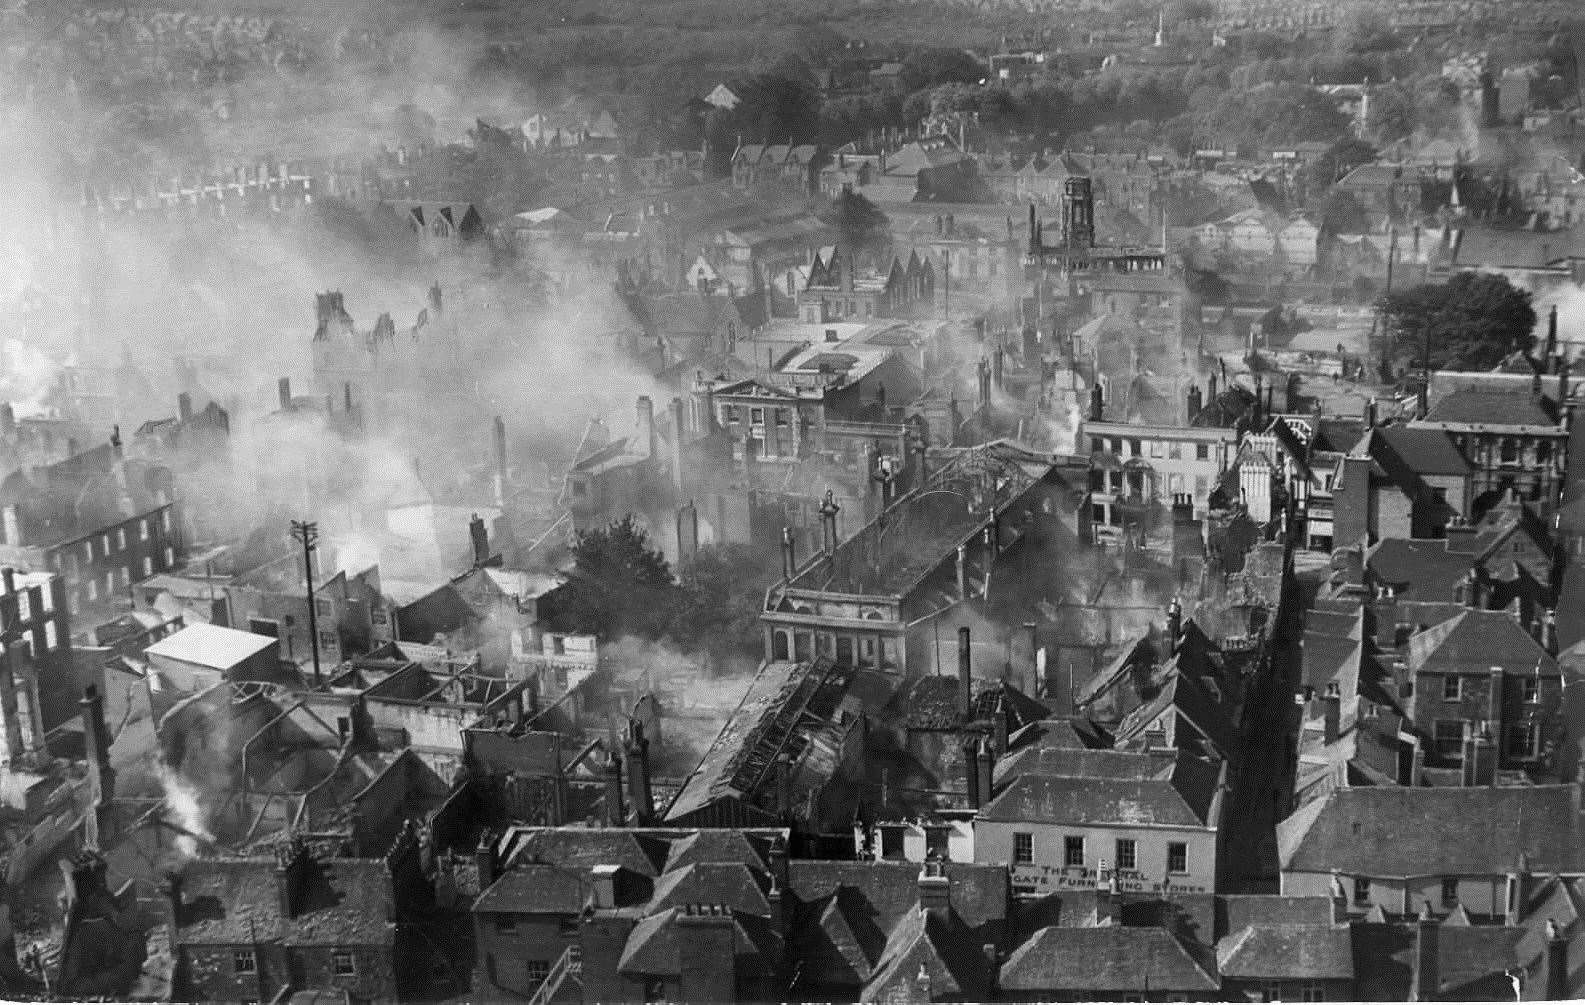 Tragedy came to the historic city of Canterbury on June 1, 1942. Picture: Anthony Swaine